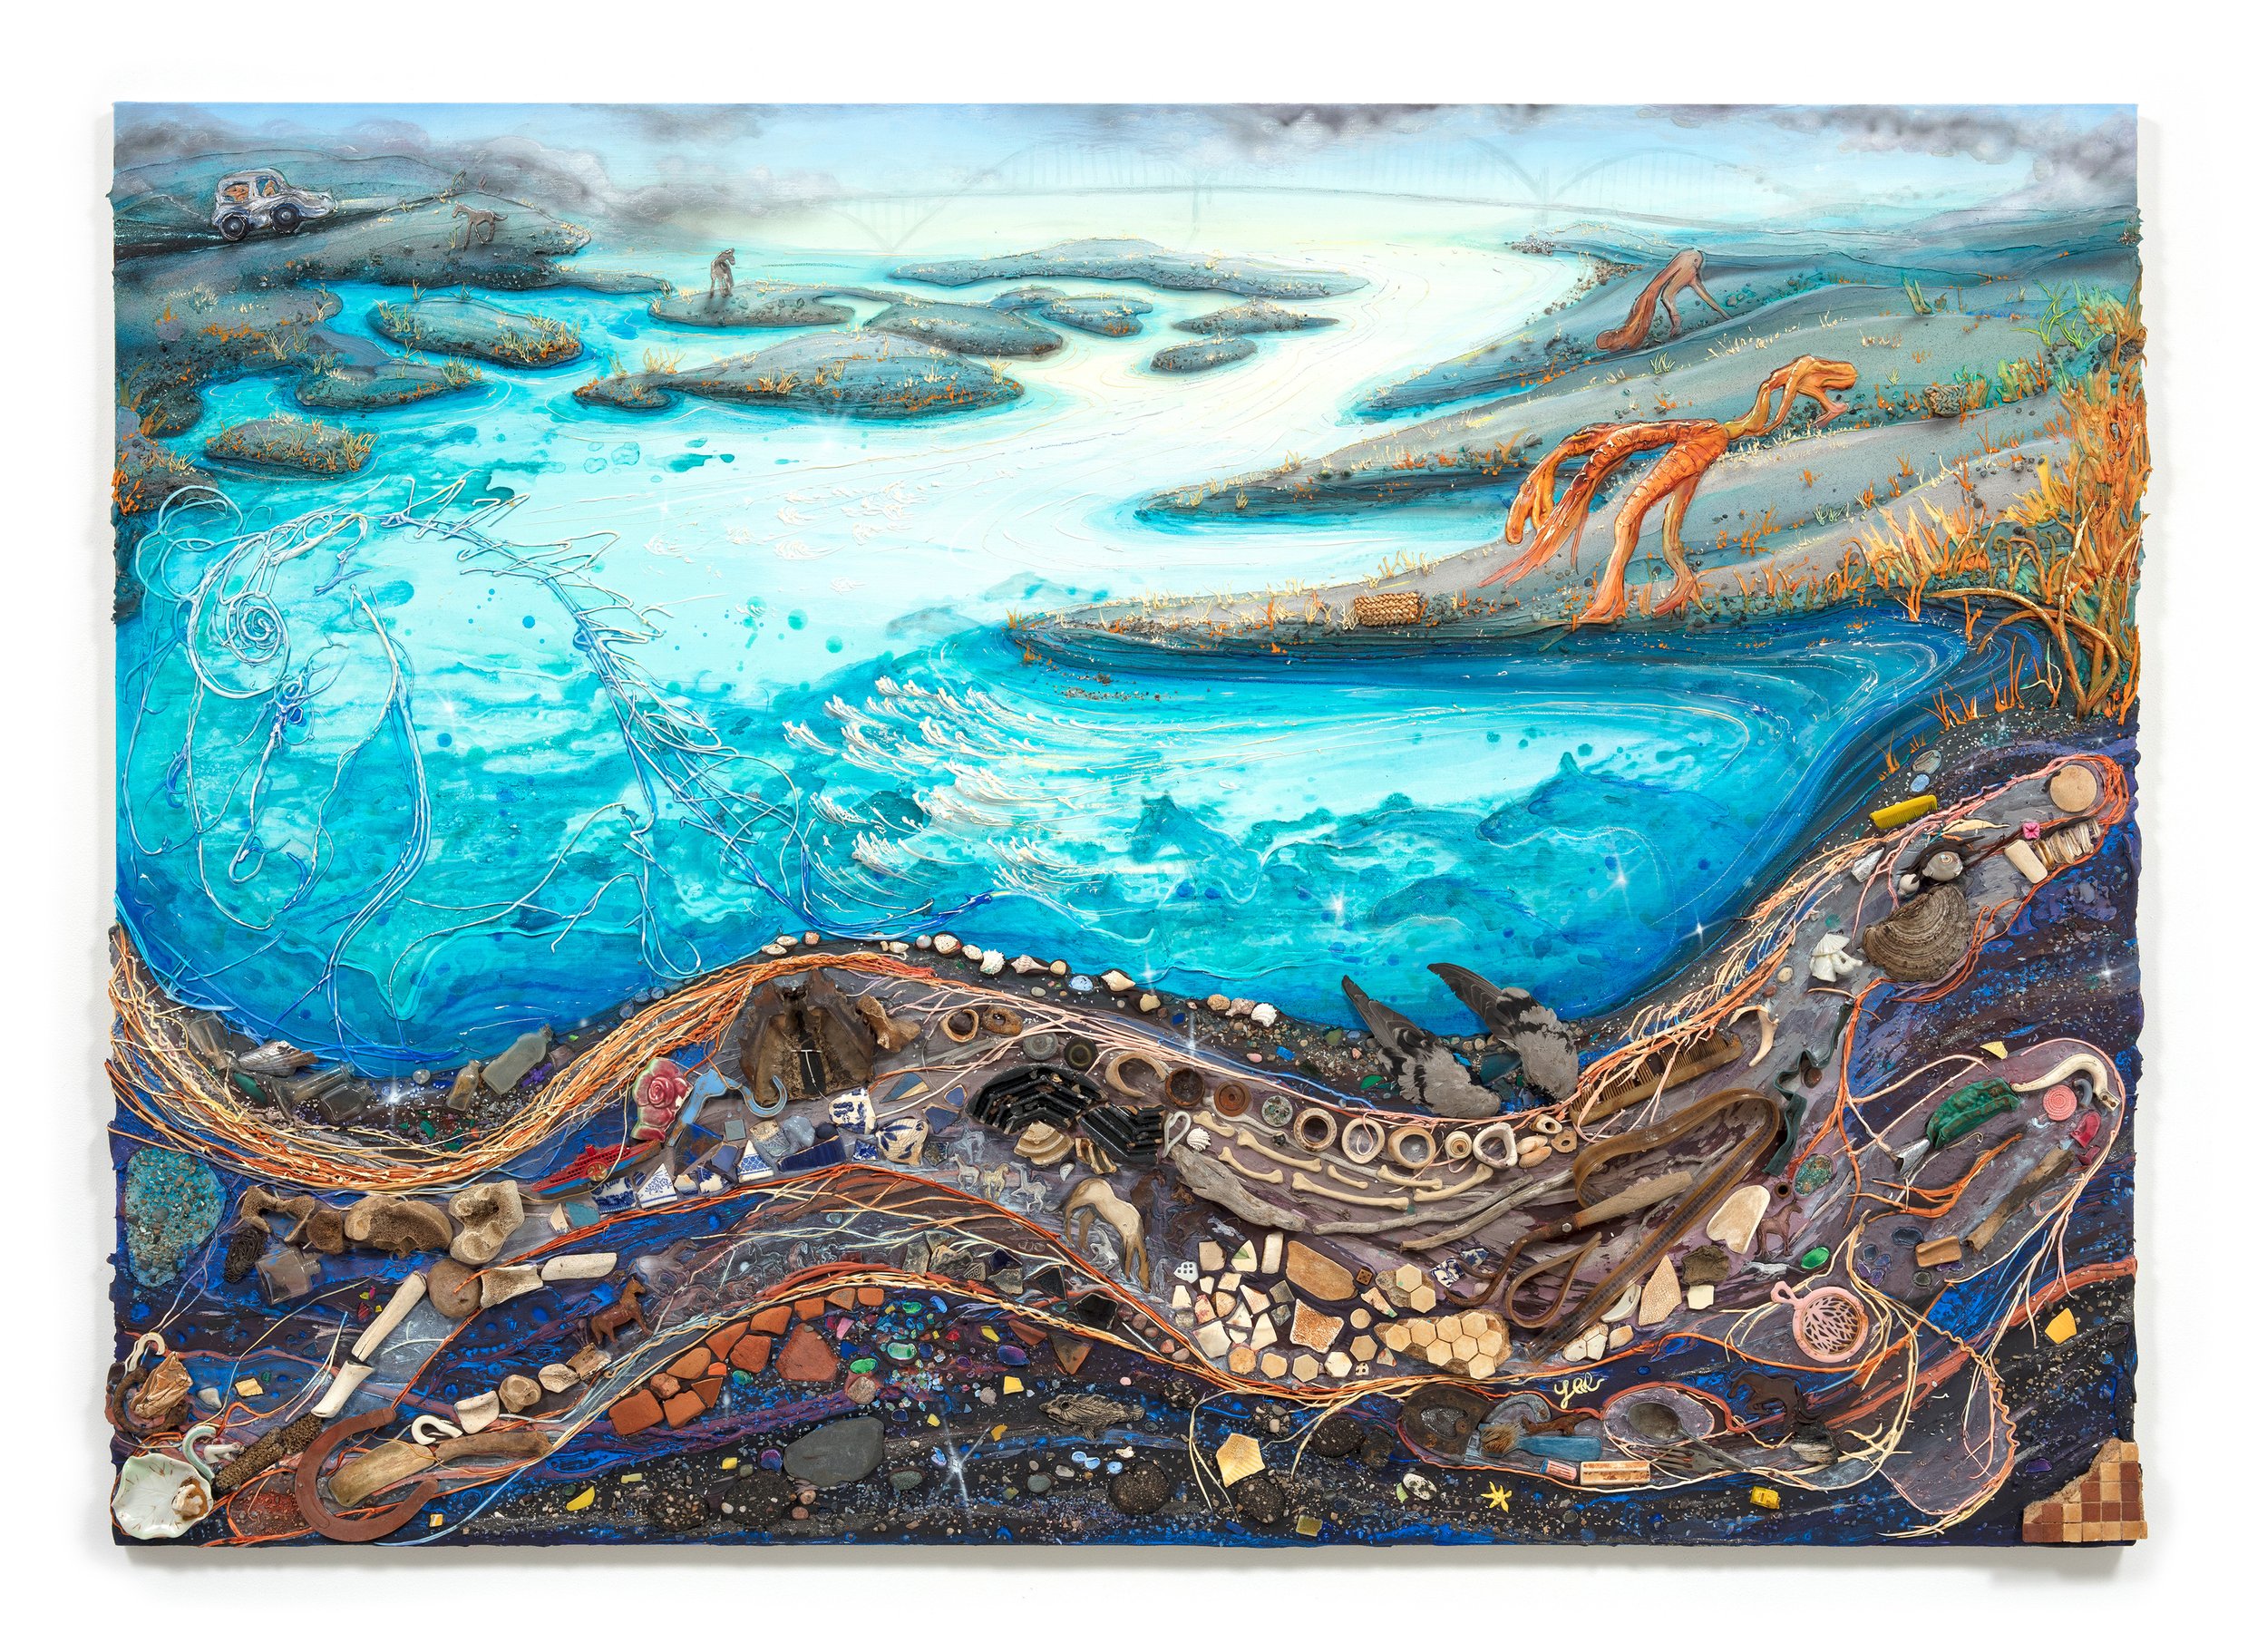   Dead Horse Bay , 2022. Acrylic, pigment, watercolor, vinyl paint, sand, pumice, crushed garnet, rocks from Lake Michigan, shells, ceramic, mica, found objects from Dead Horse Bay (horse teeth, bone, tile, horseshoe crab, plastic belt, spoon, fork, 